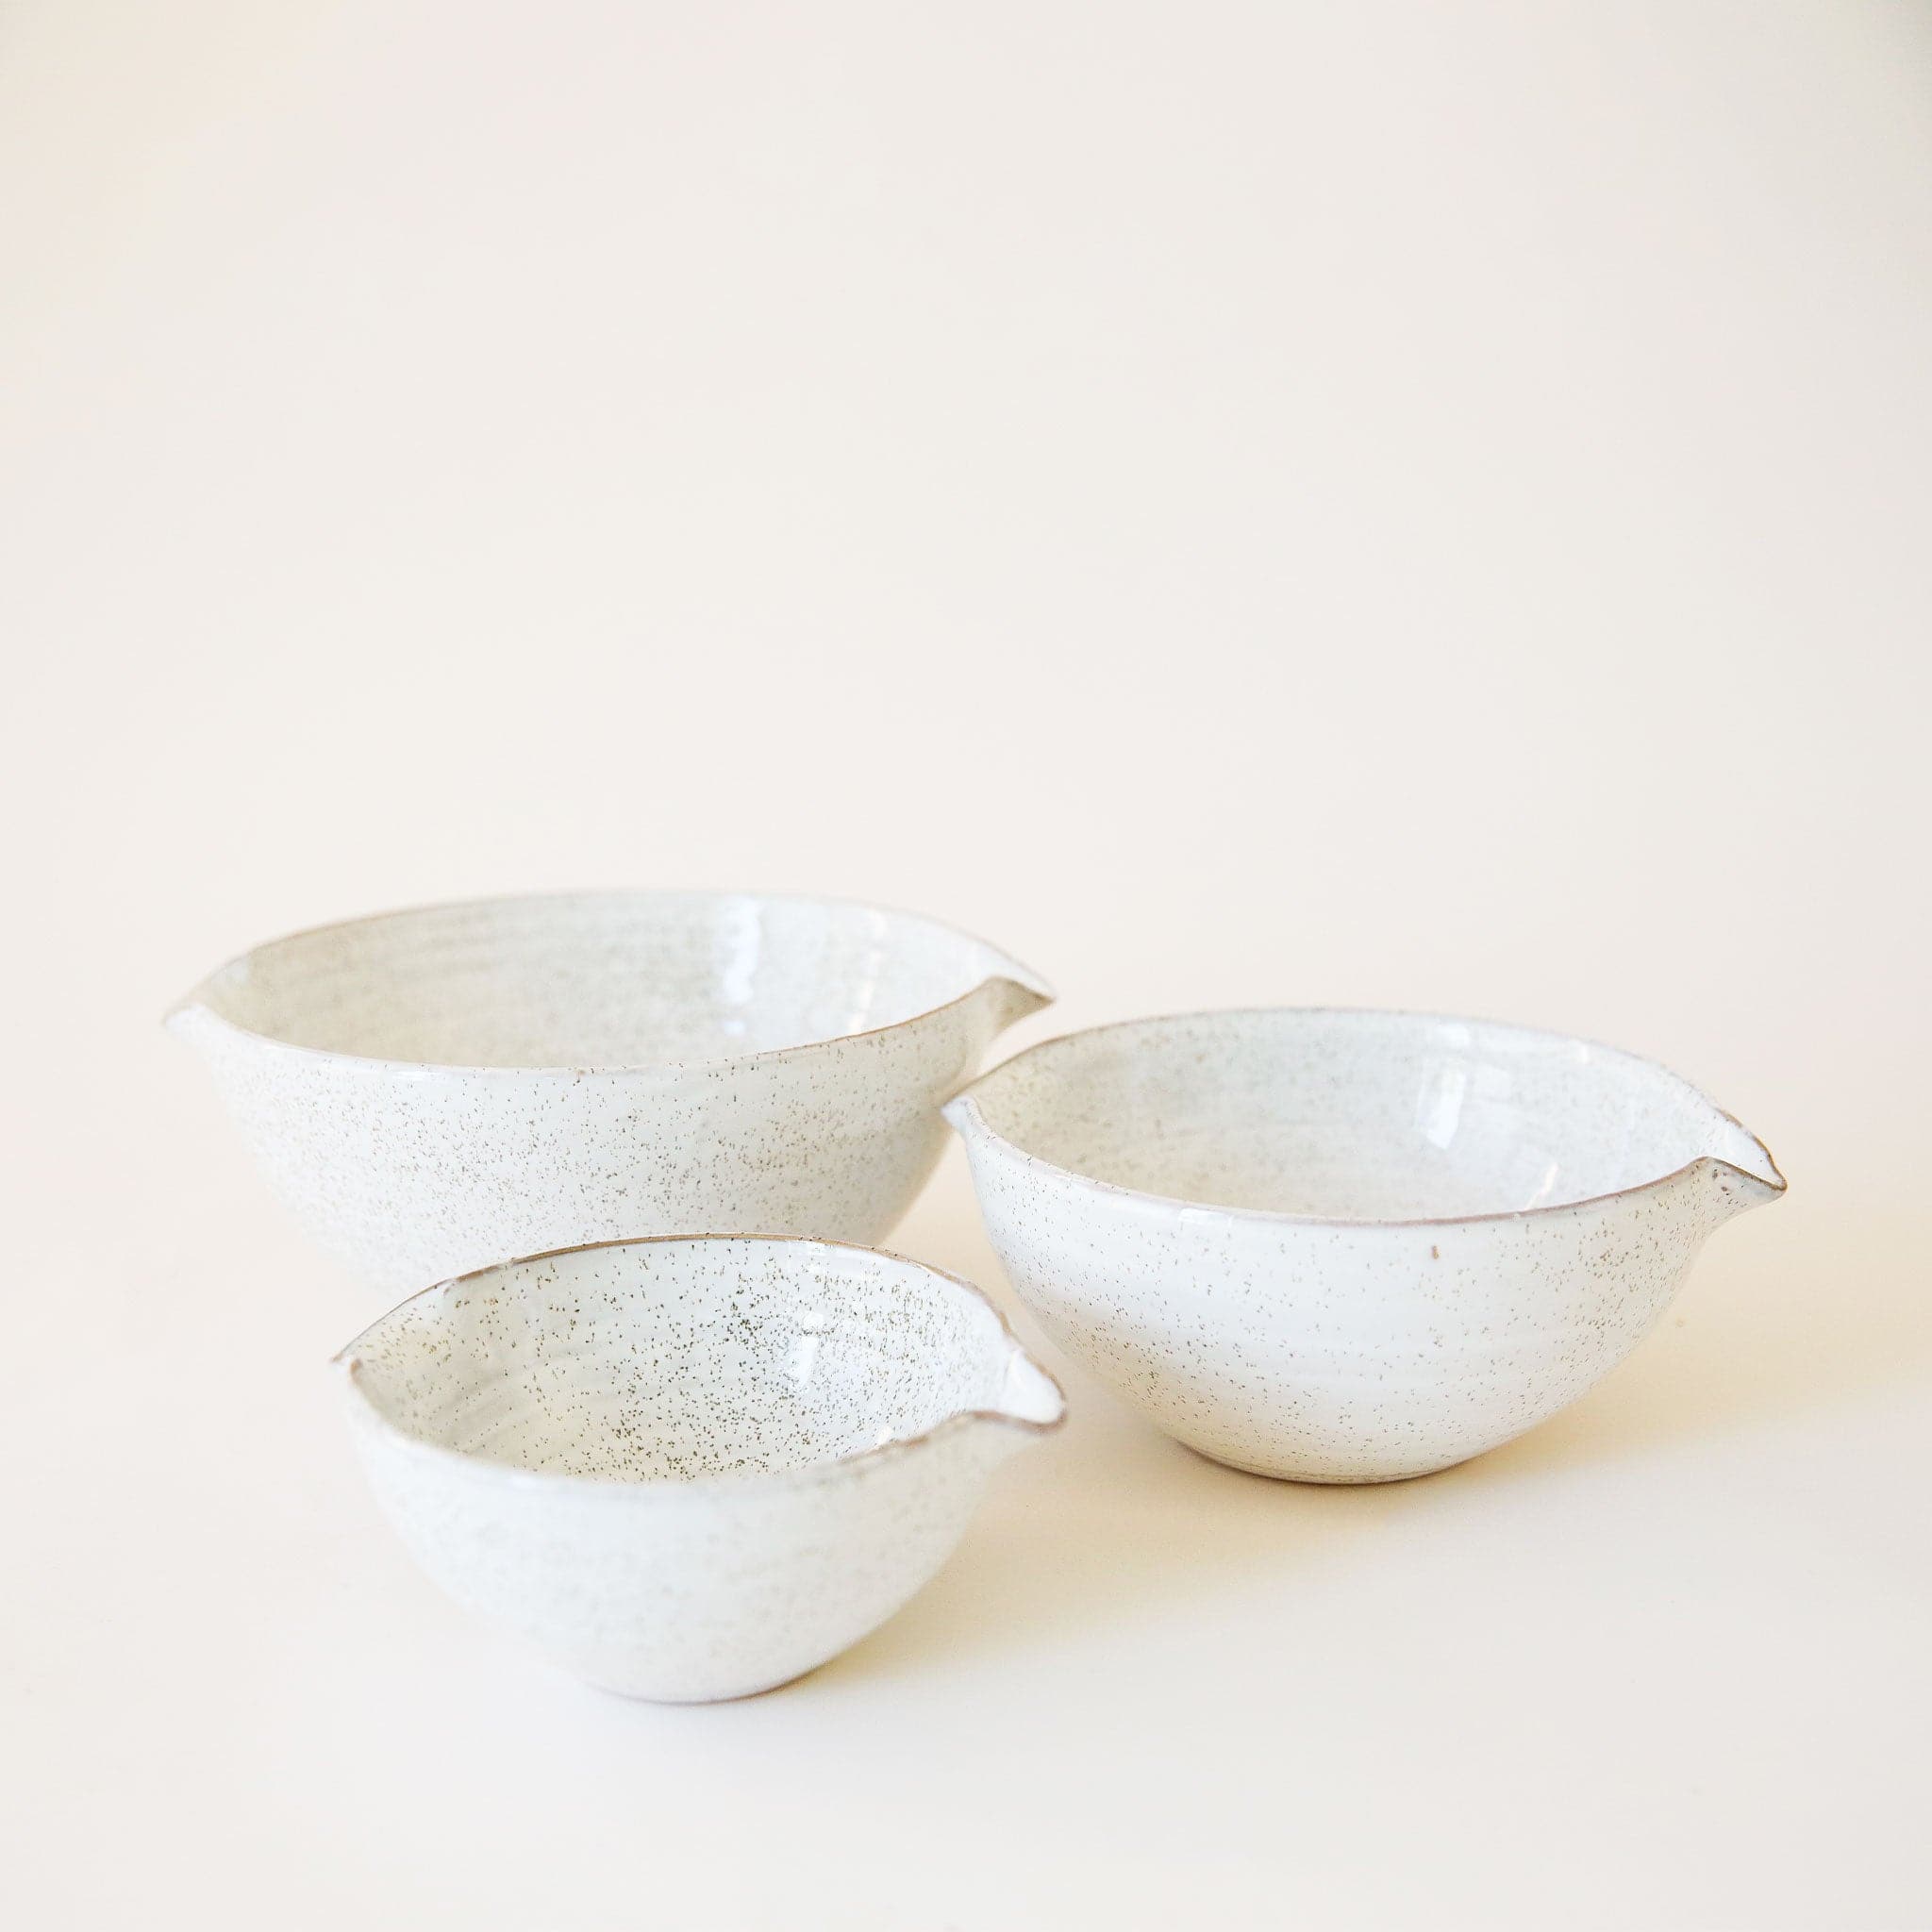 A set of three ceramic bowls nested inside one another. They feature a white base, glossy finish and a tan/brown speckled design. They are rounded bowls with a &#39;v&#39; shaped design on two of the sides making them ideal for pouring if needed.